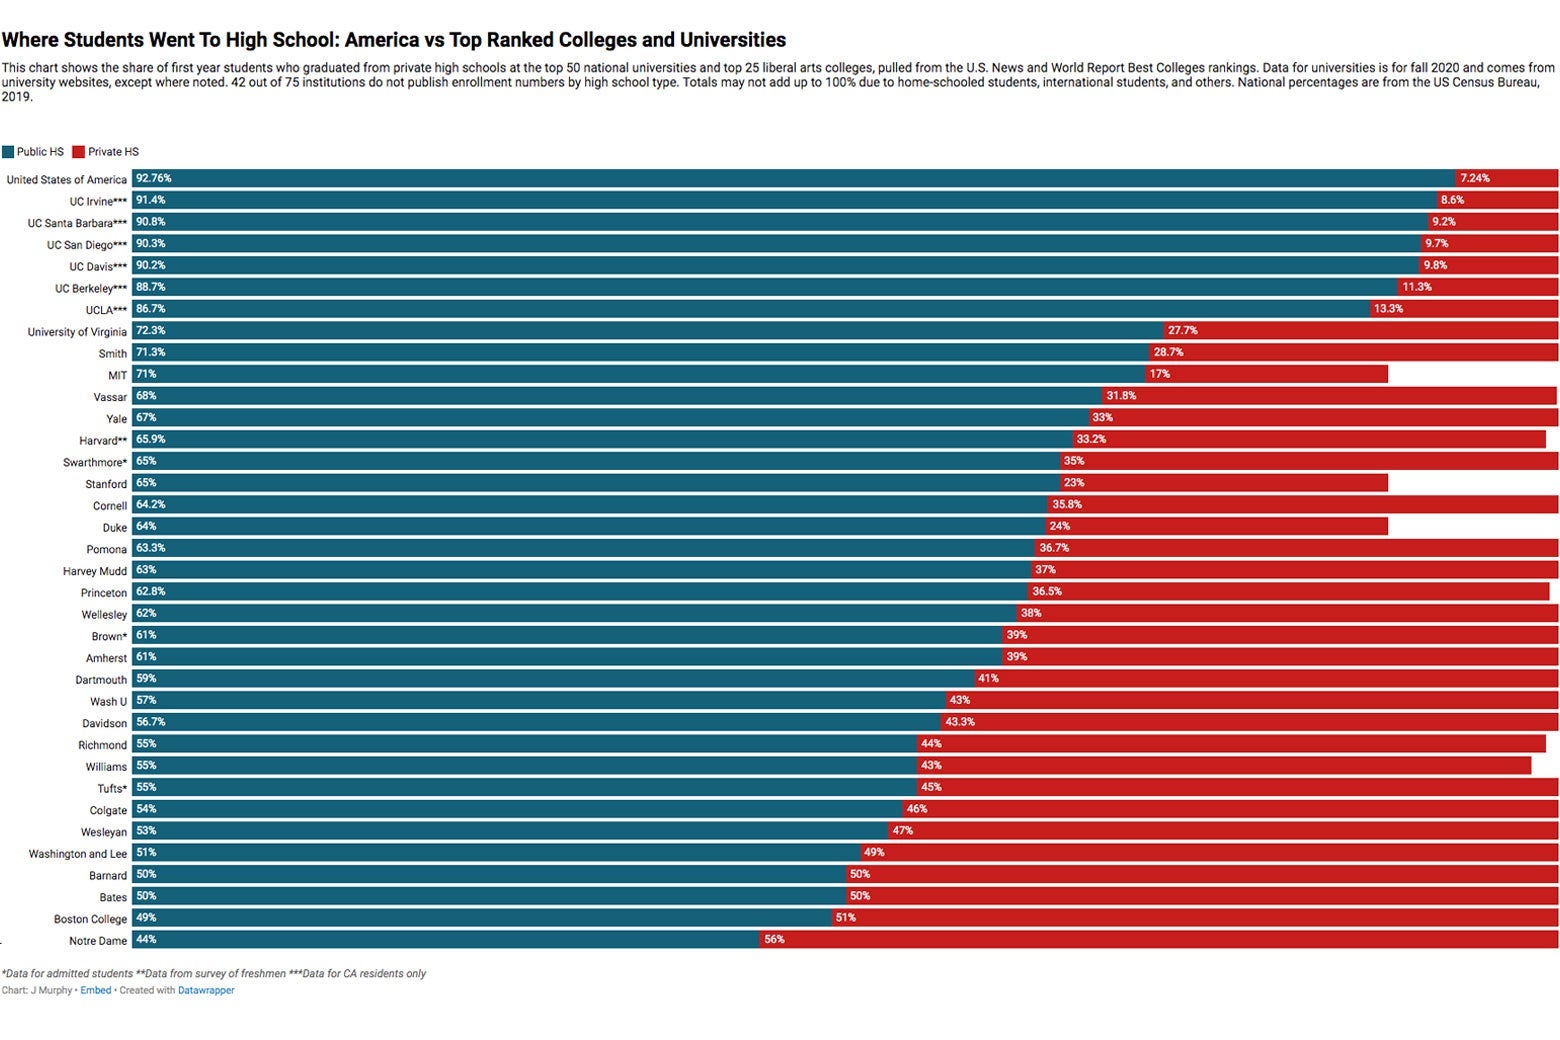 A bar graph that portrays where students admitted to selective colleges went to high school